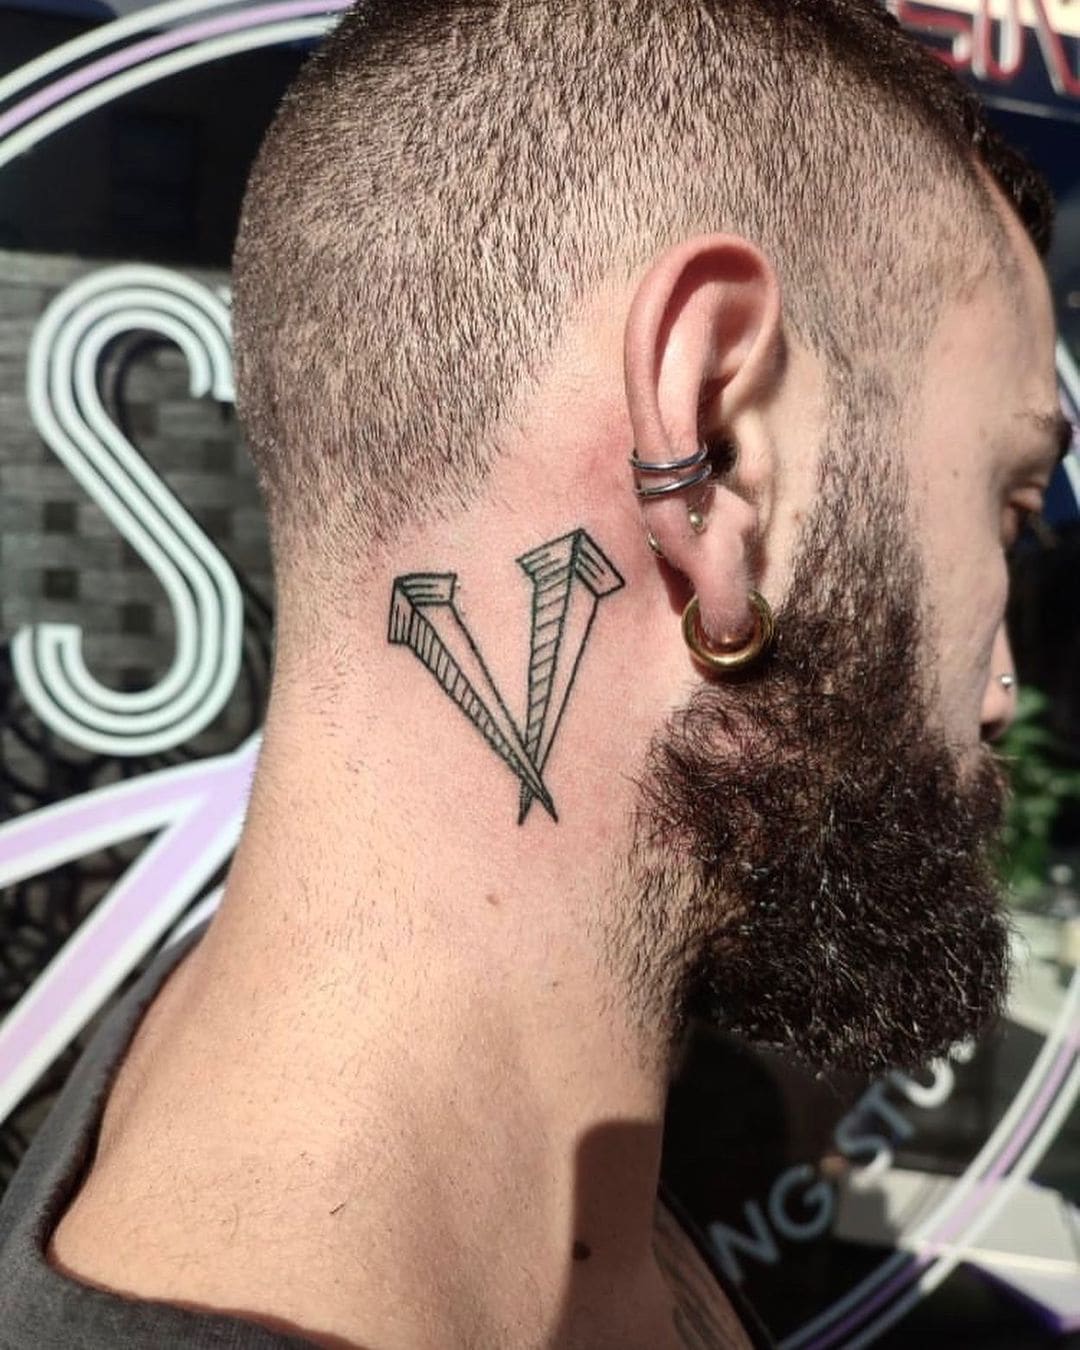 35 of the most glorious neck tattoos!